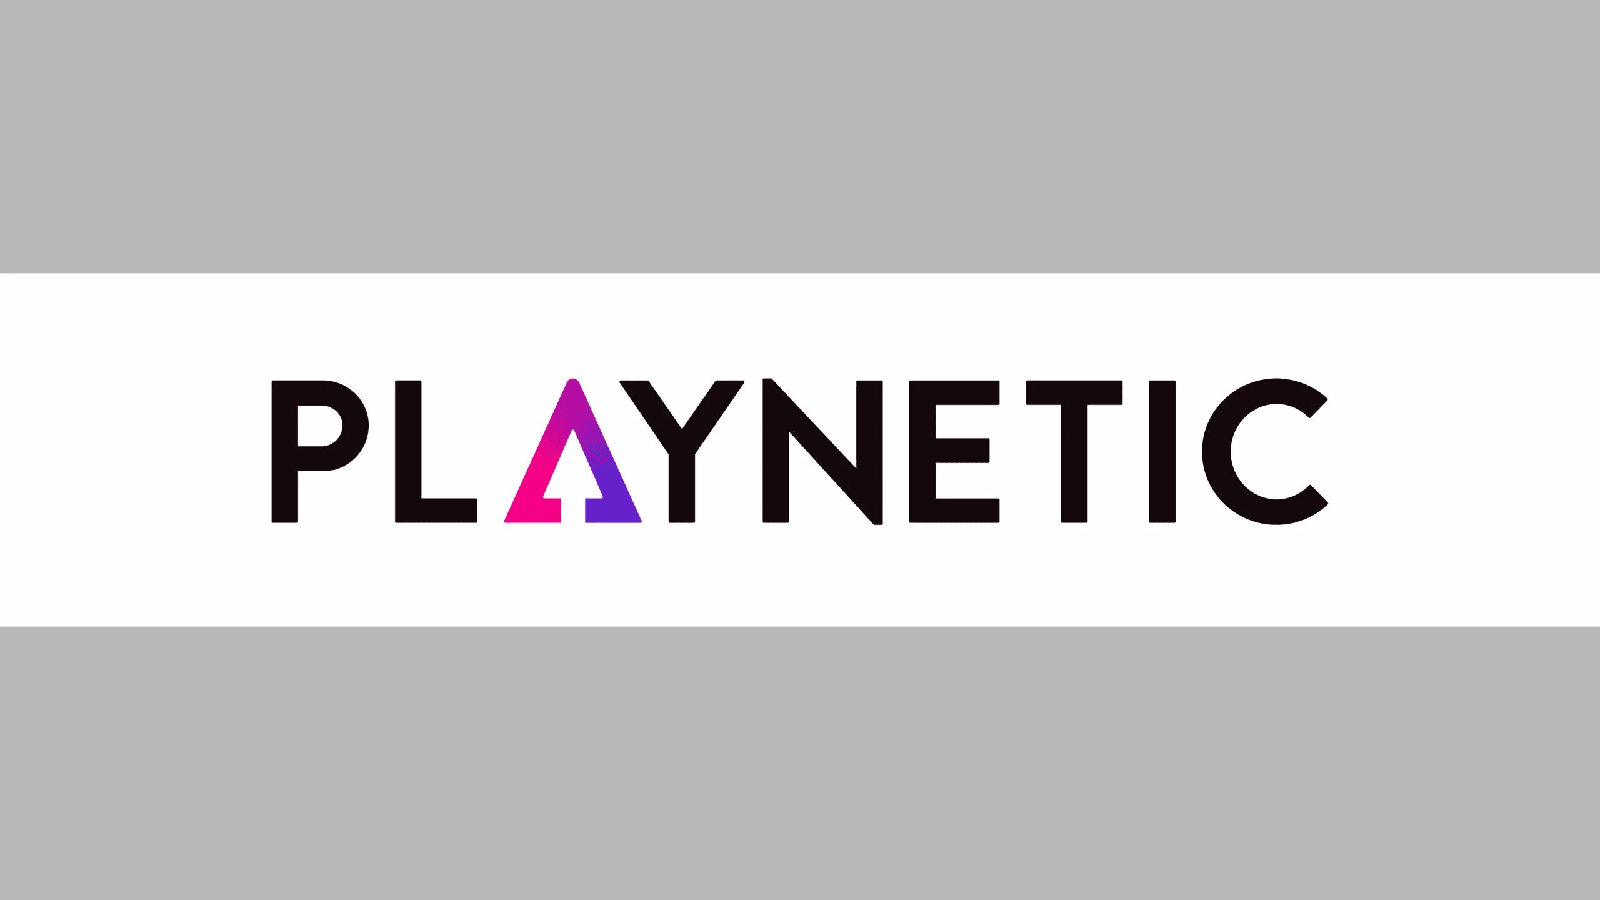 Playnetic Sparks iGaming Revolution